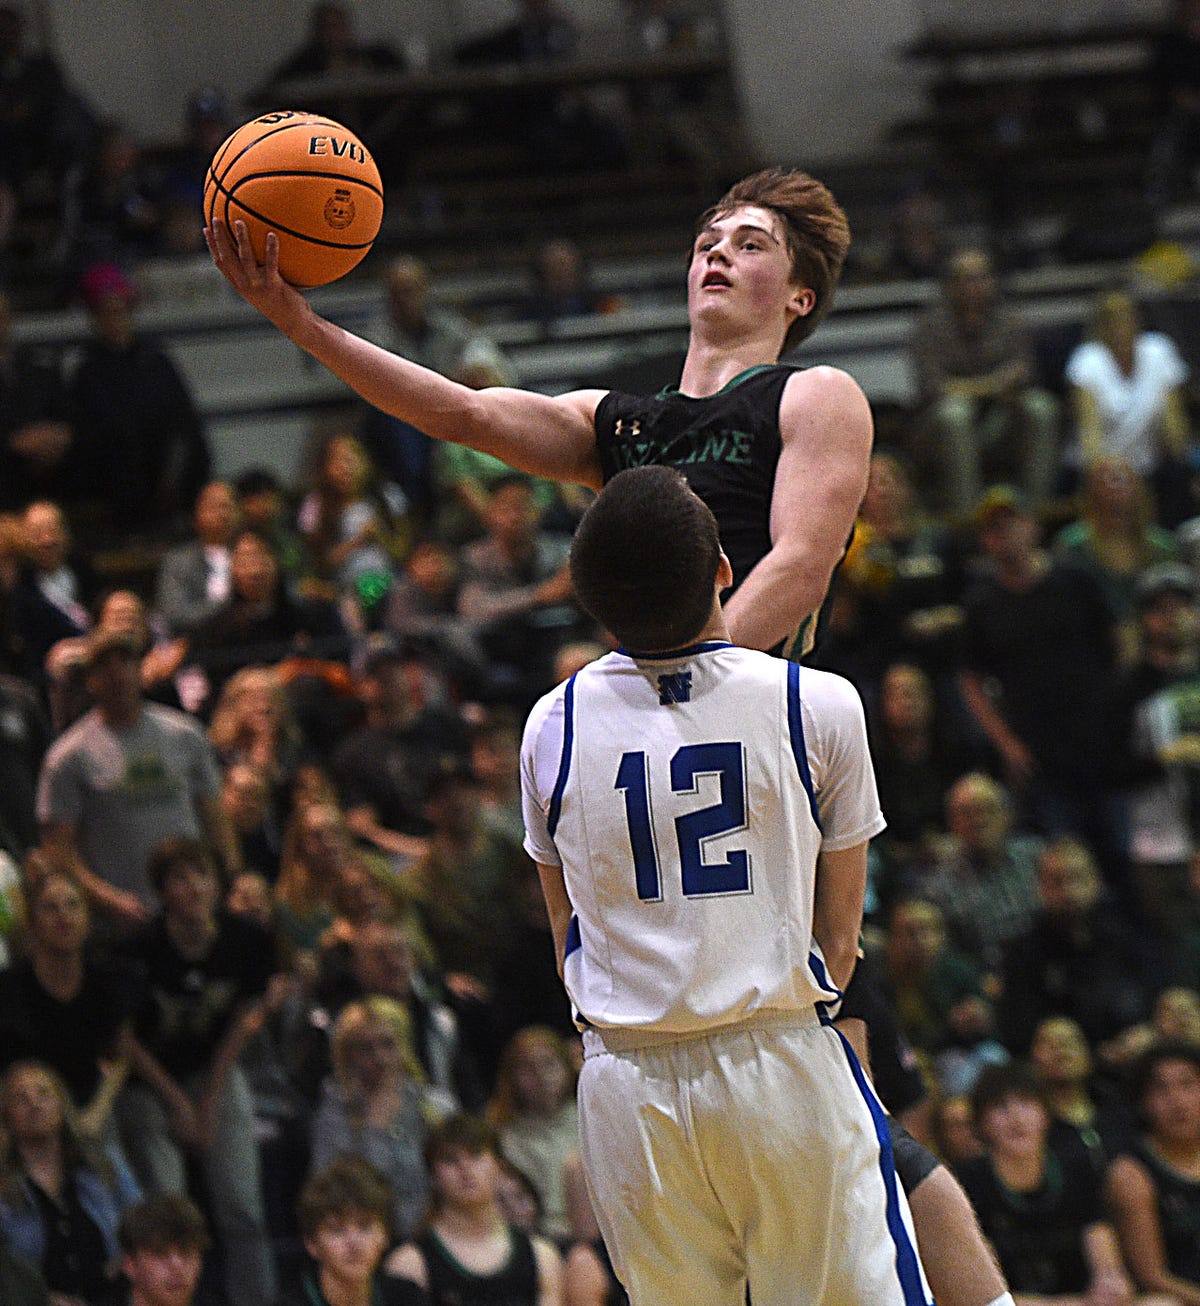 Thrilling Wins and Upsets Shine in Nevada High School Basketball Championships